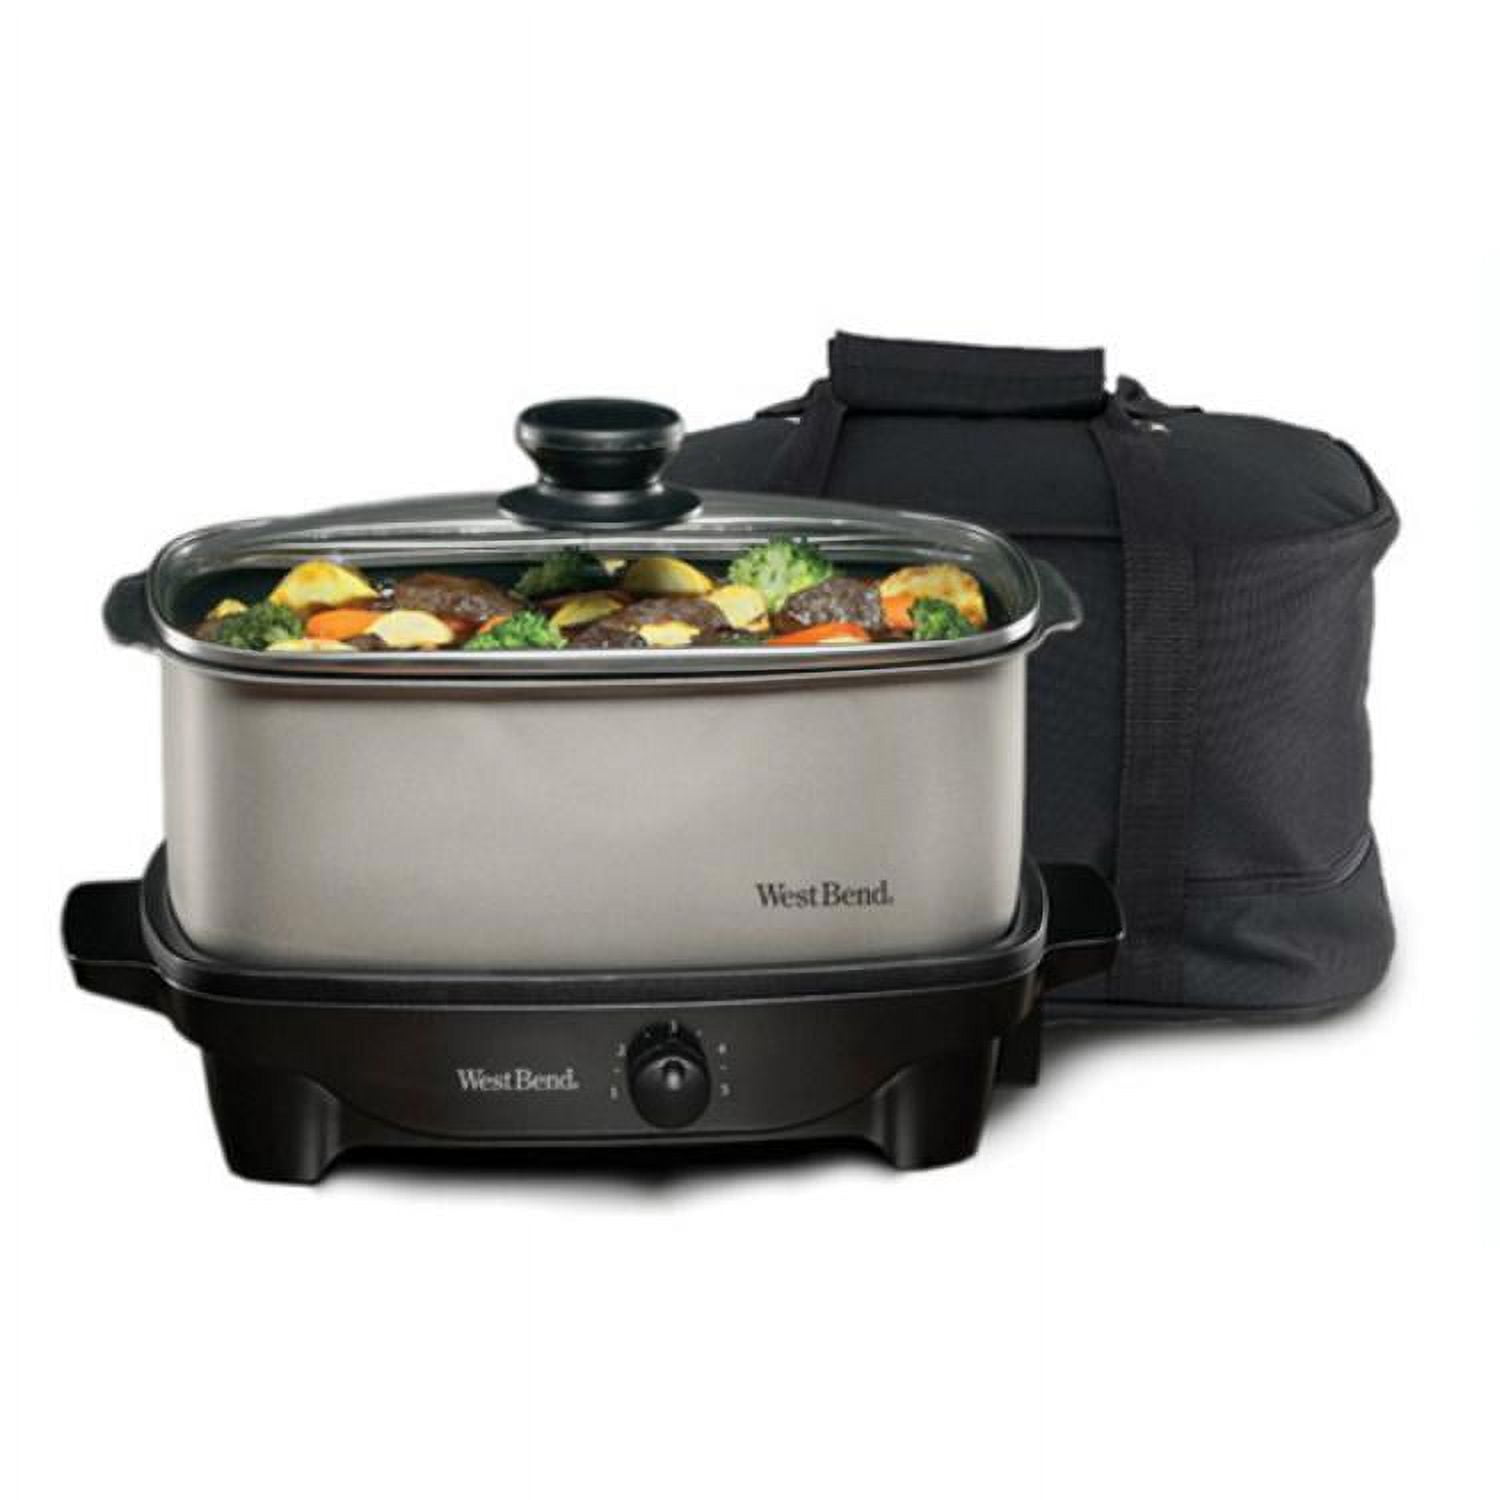 CooksEssentials 4 qt Oval Slow Cooker w/ Travel Bag 